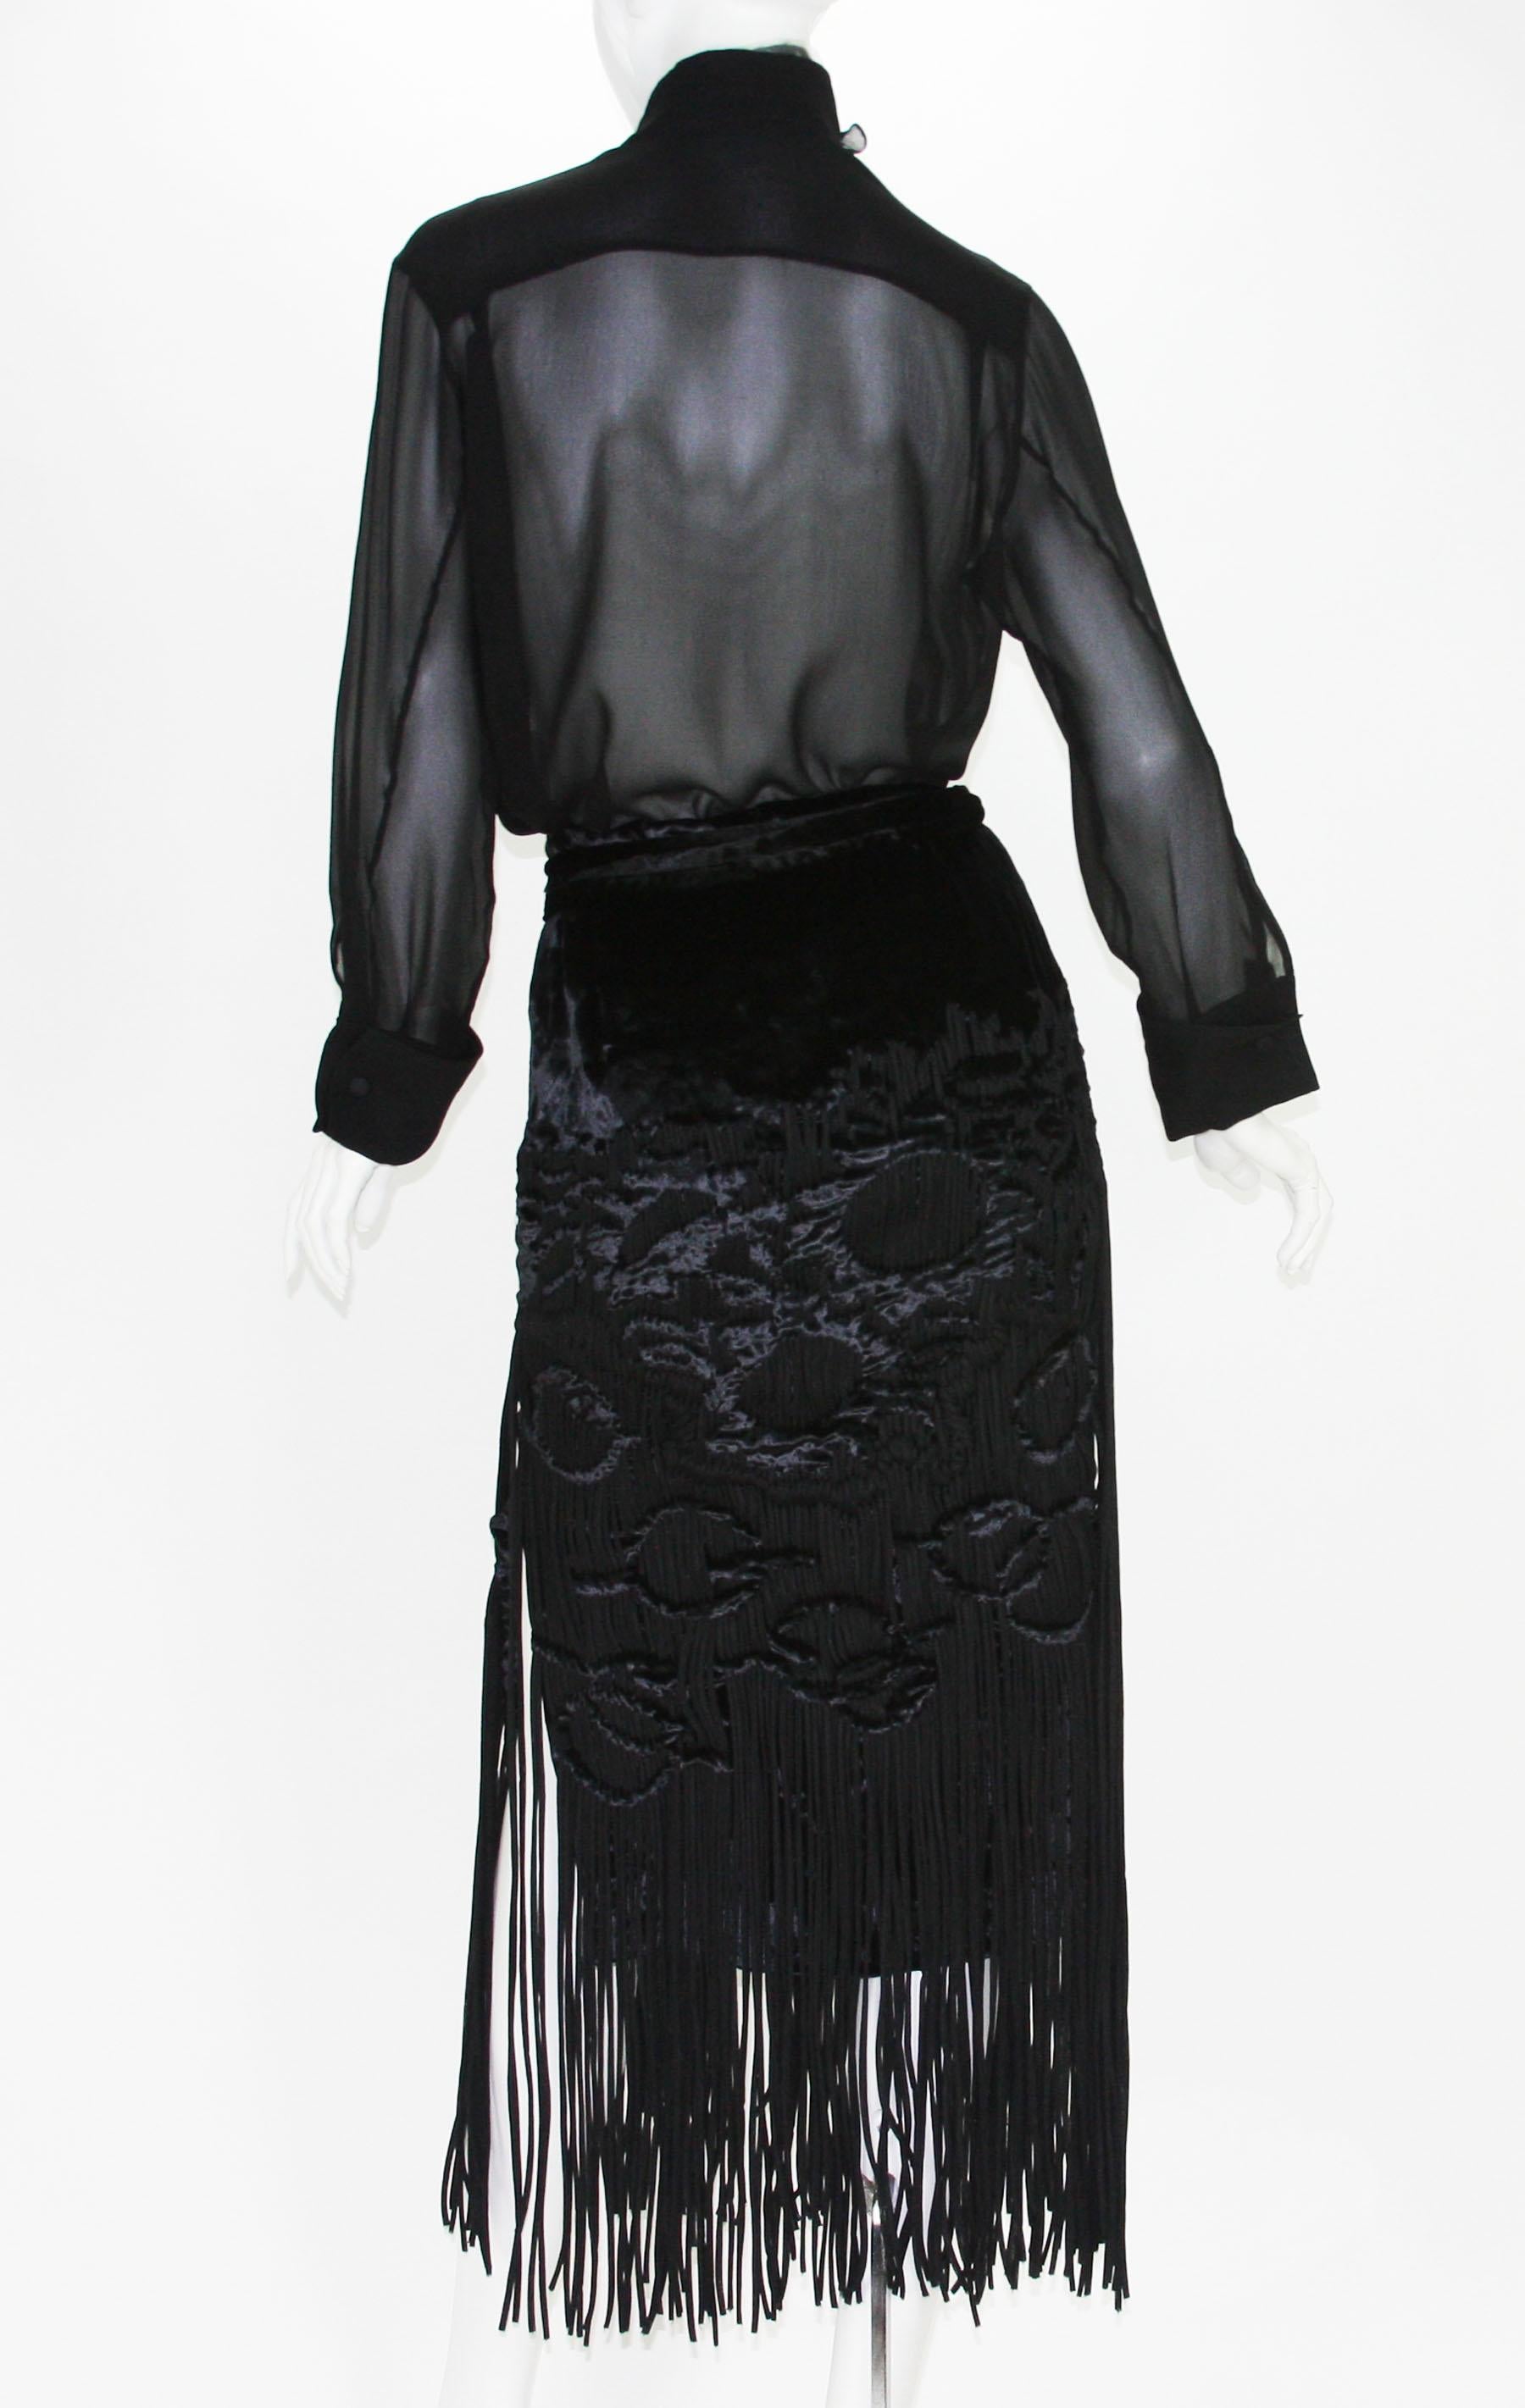 Tom Ford for Yves Saint Laurent Rare Skirt Suit
French size 36 - US 4 
Blouse - S/S 2003 Collection, 100% Sheer Silk, Buttons Closure, Cut-out Details, New with Extra Buttons.
Skirt - F/W 2001 Collection, The design of this skirt is extraordinary